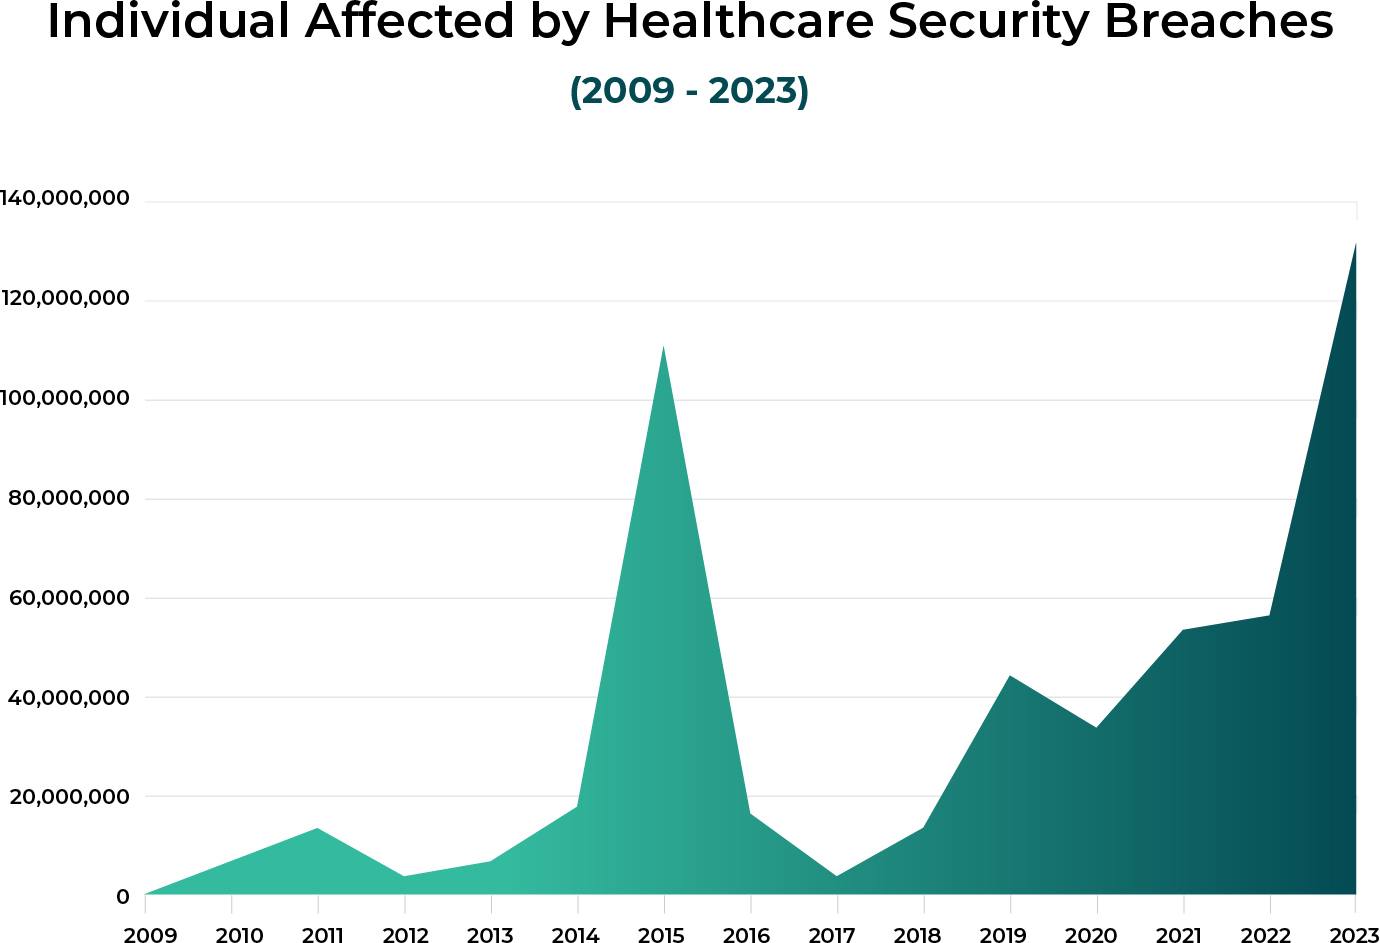 Individual Affected by Healthcare Security Breaches